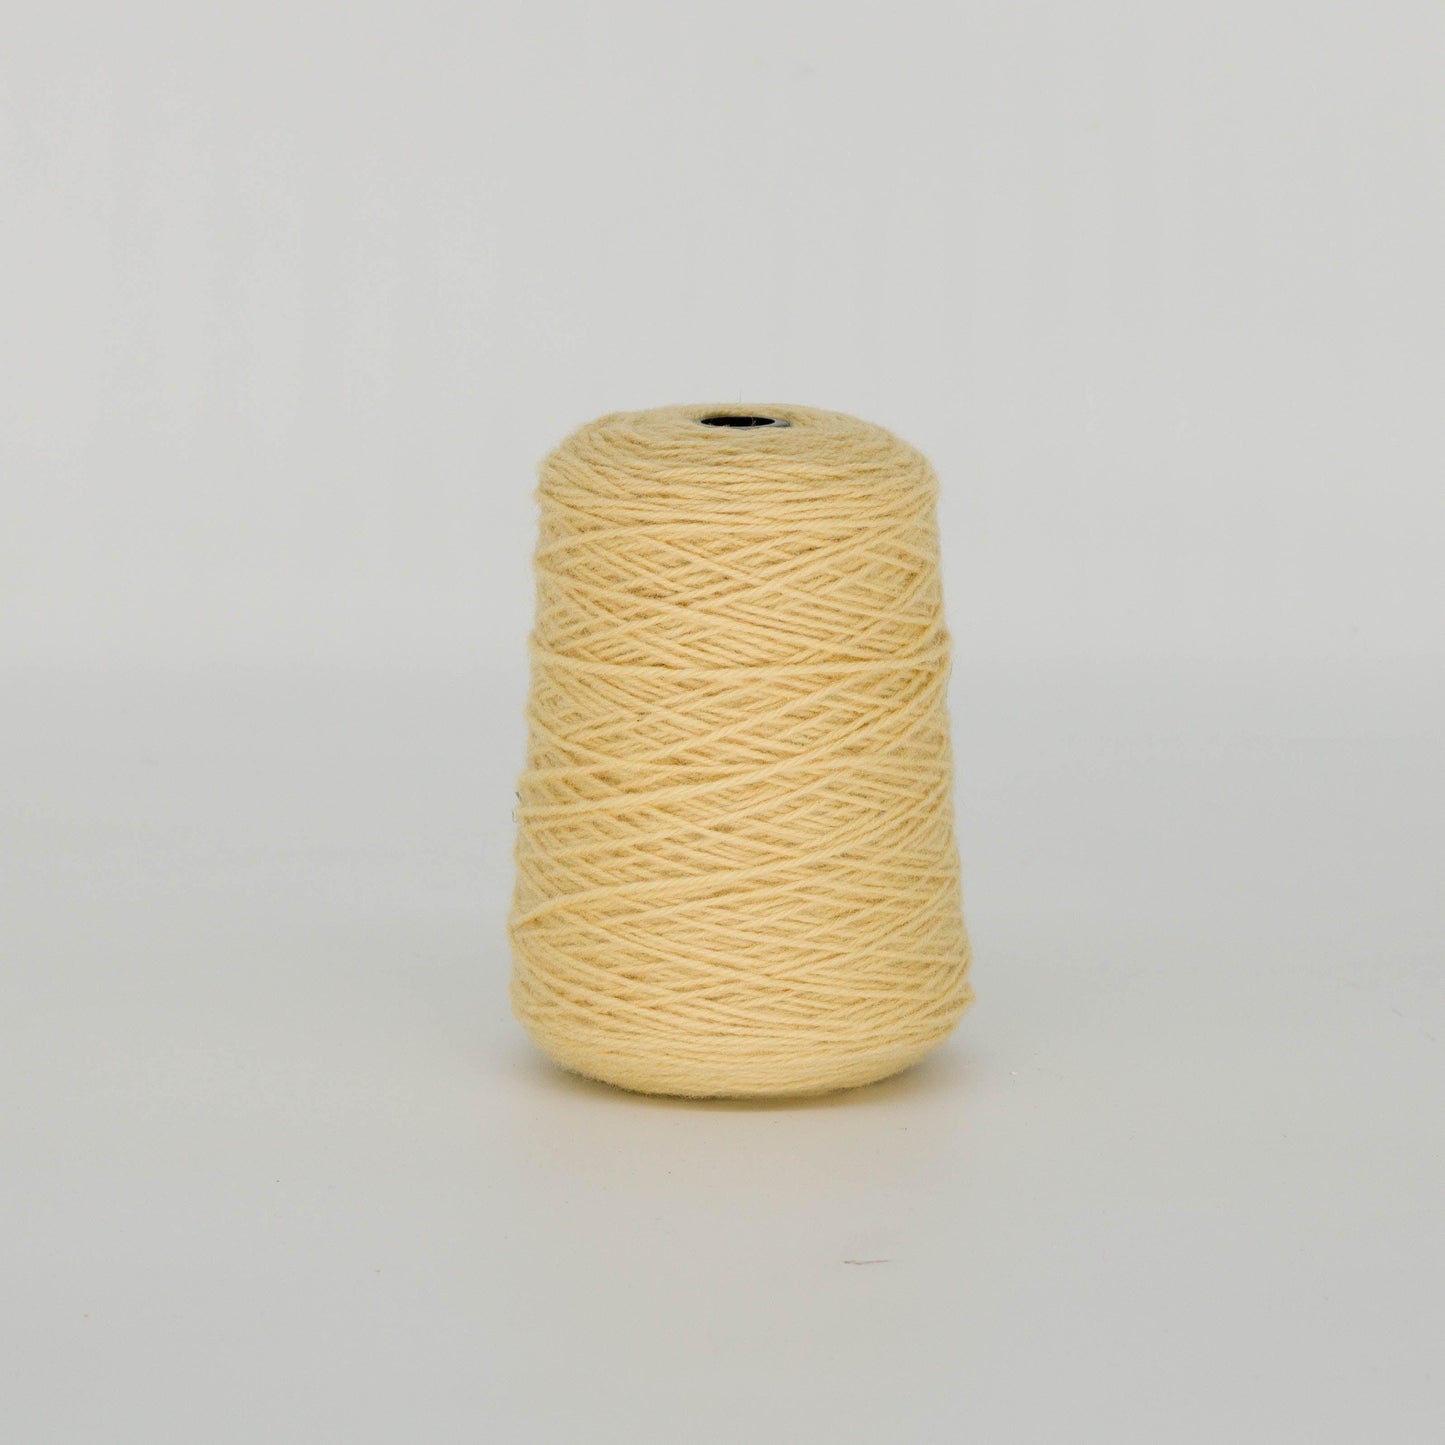 Light yellow / butter 100% Wool Rug Yarn On Cones (429) - Tuftingshop